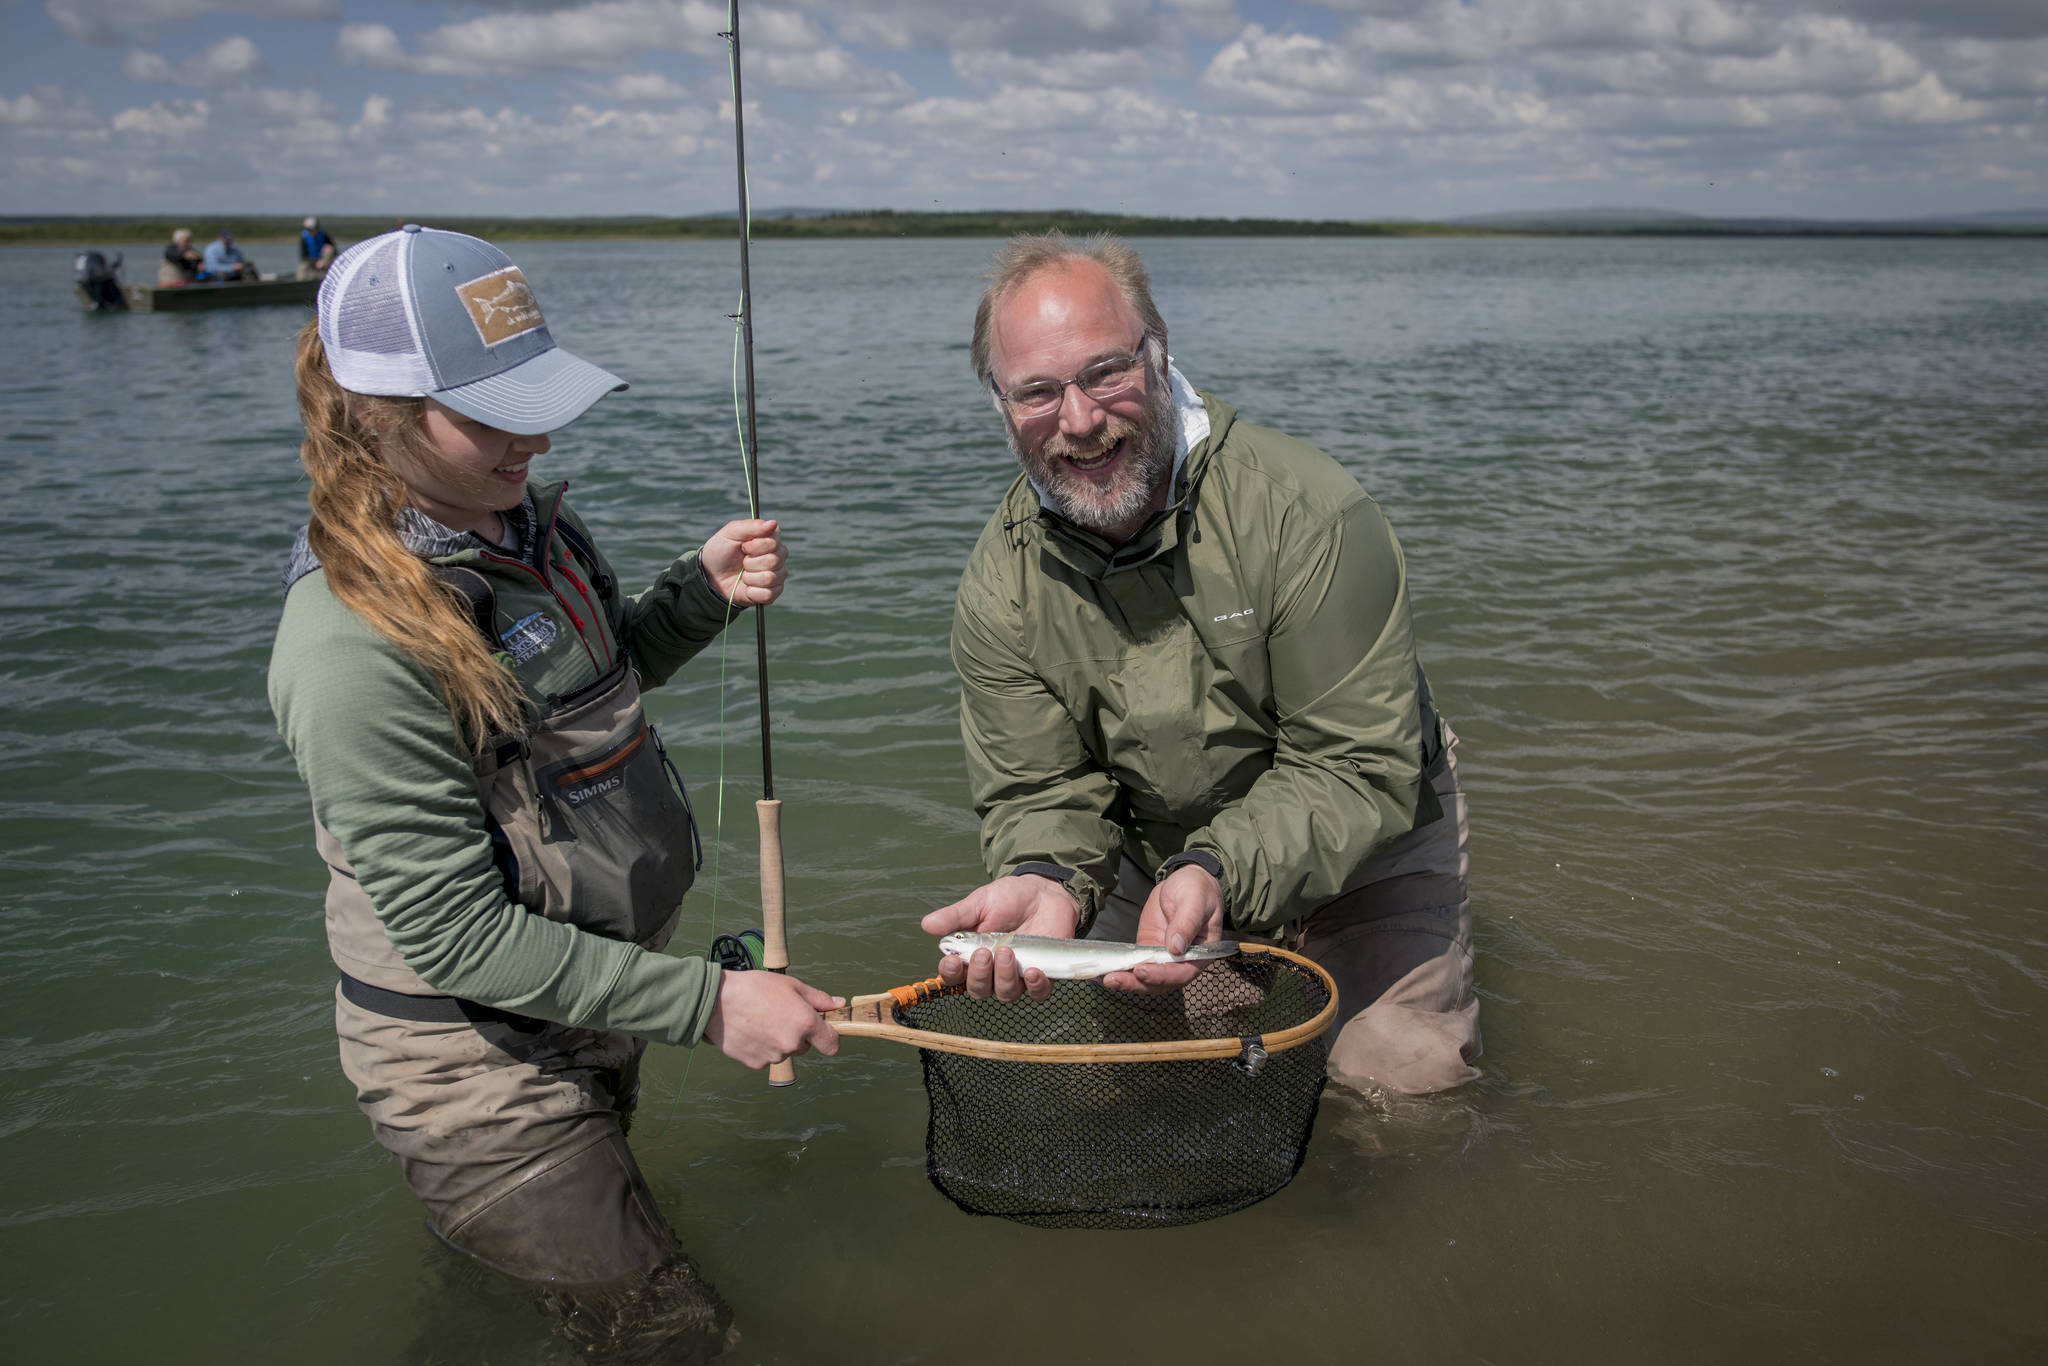 Abbey Whitcomb and her client, Naknek resident Bryon Singly, pose with a small rainbow on the Naknek River. (Courtesy Photo | Sarah Miller)